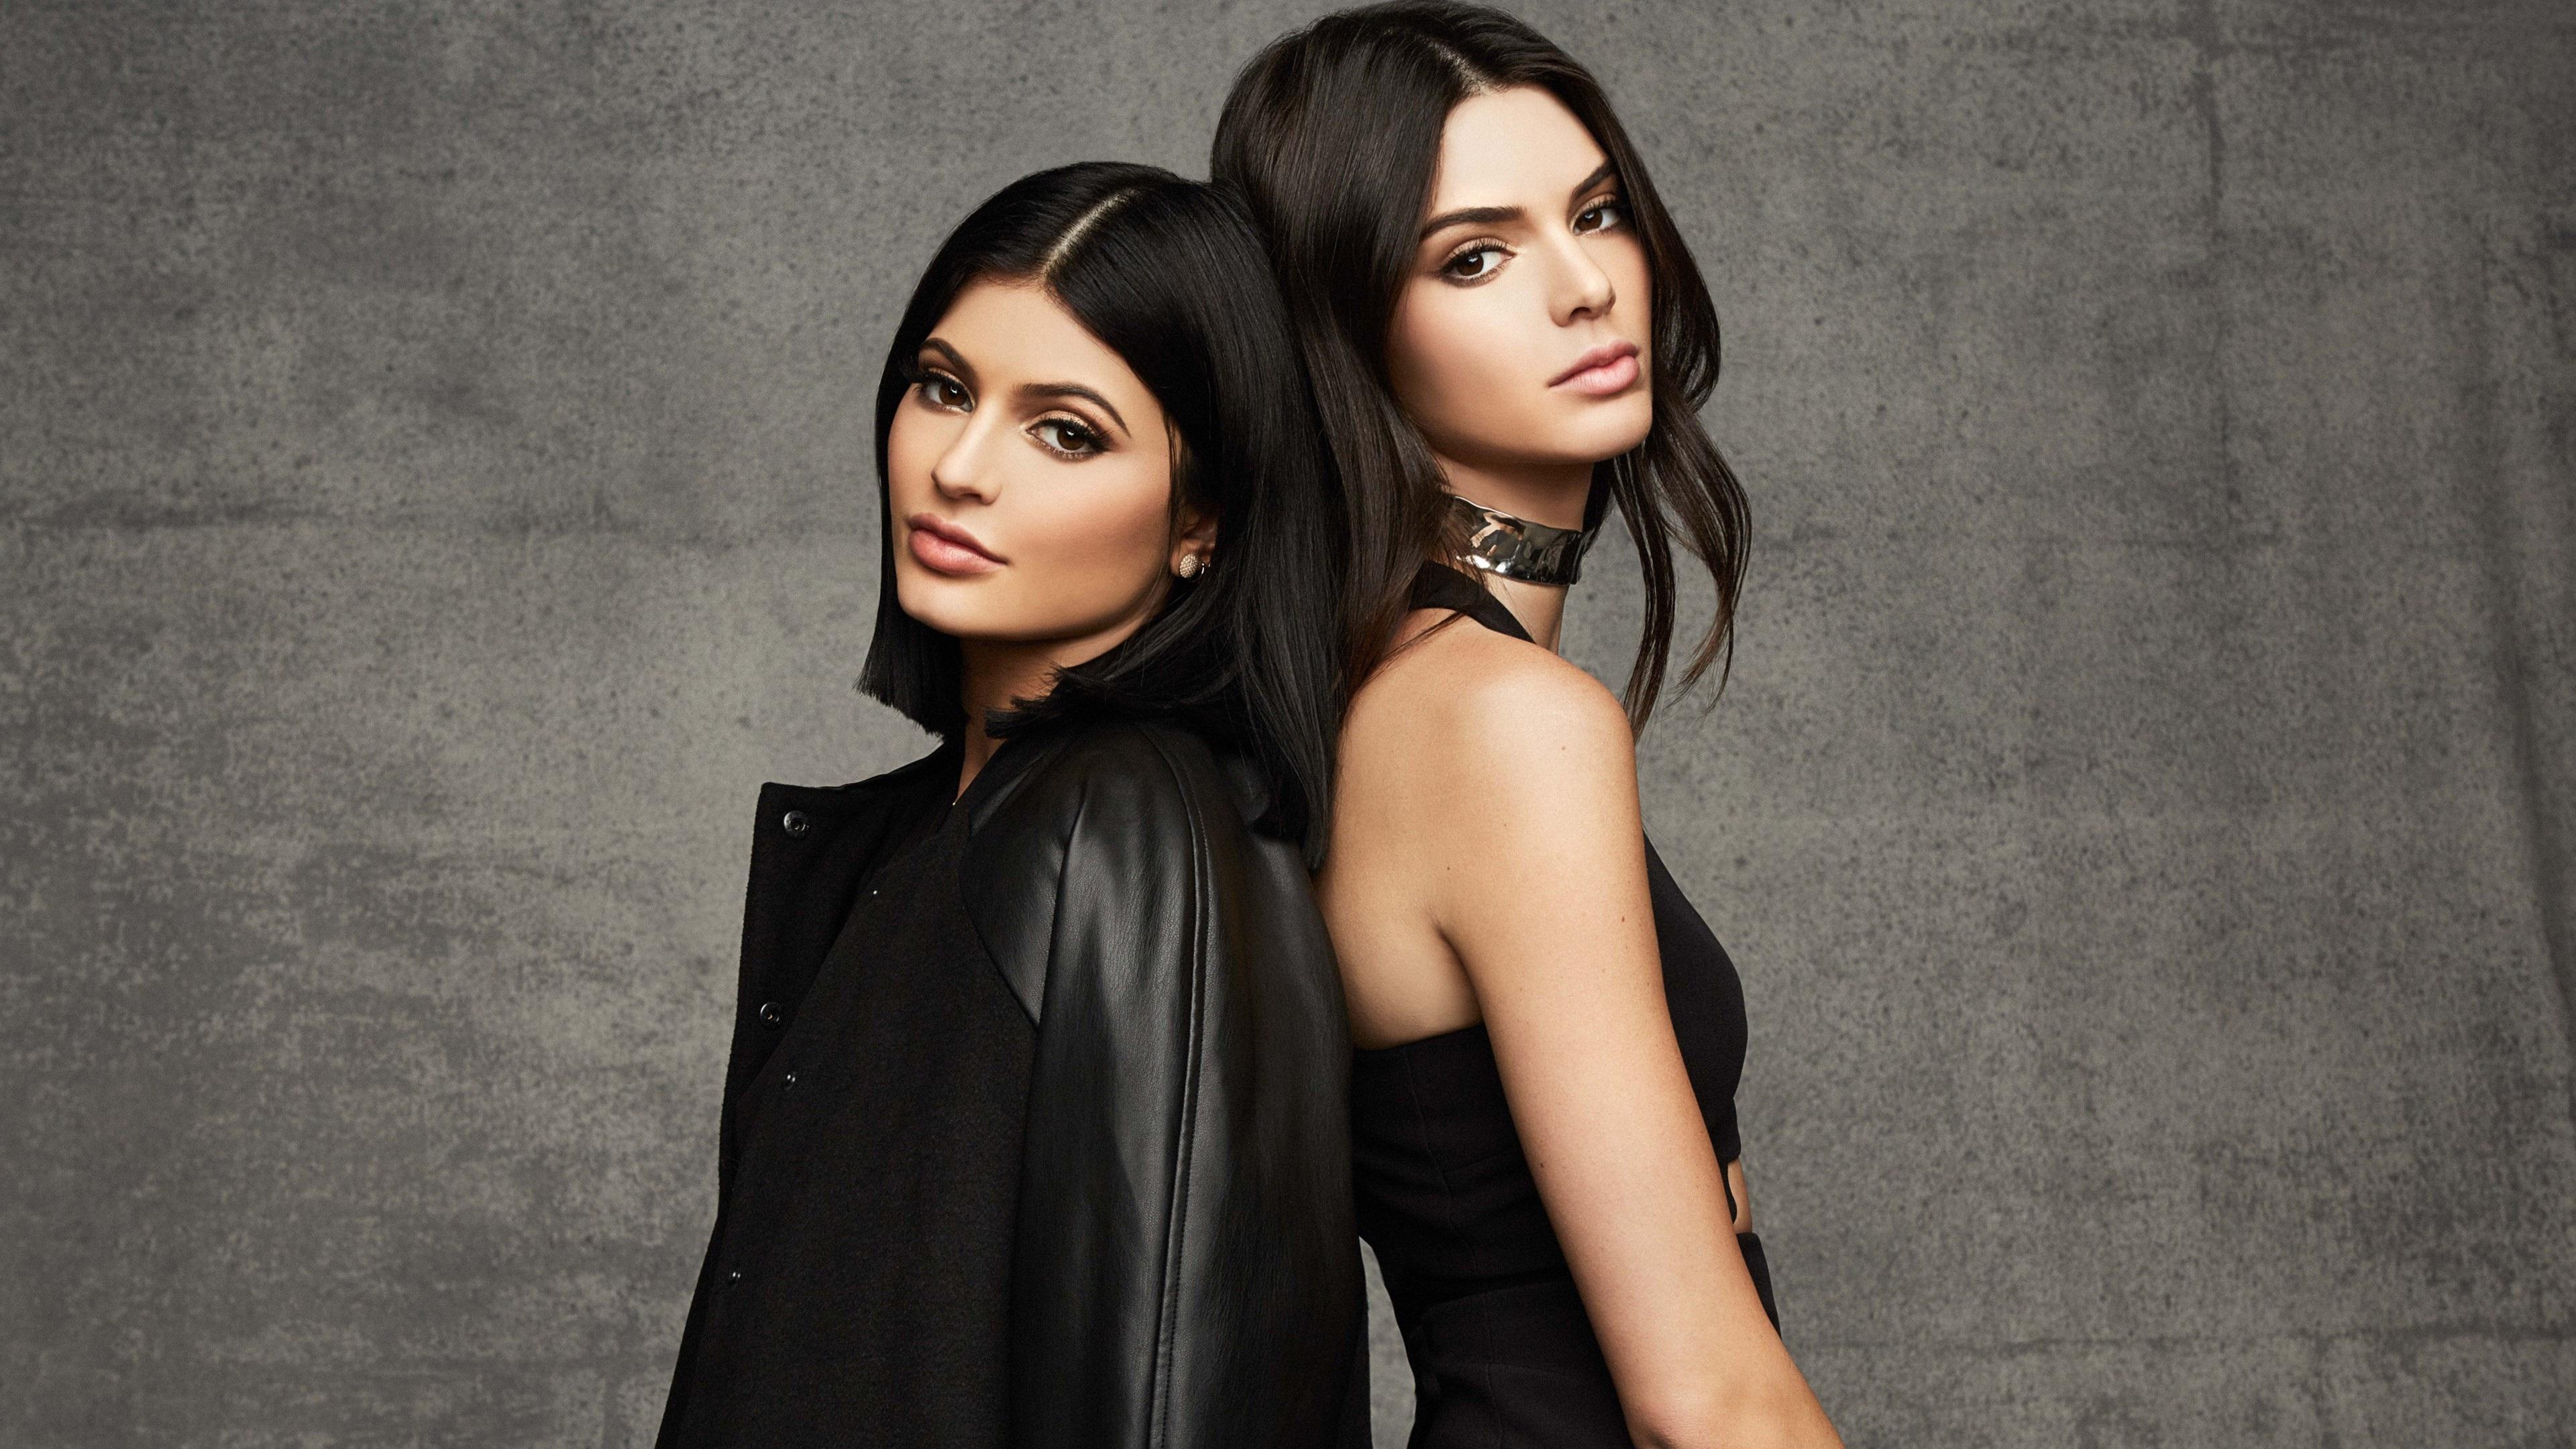 Wallpaper Kylie Jenner, Kendall Jenner 3840x2160 UHD 4K Picture, Image